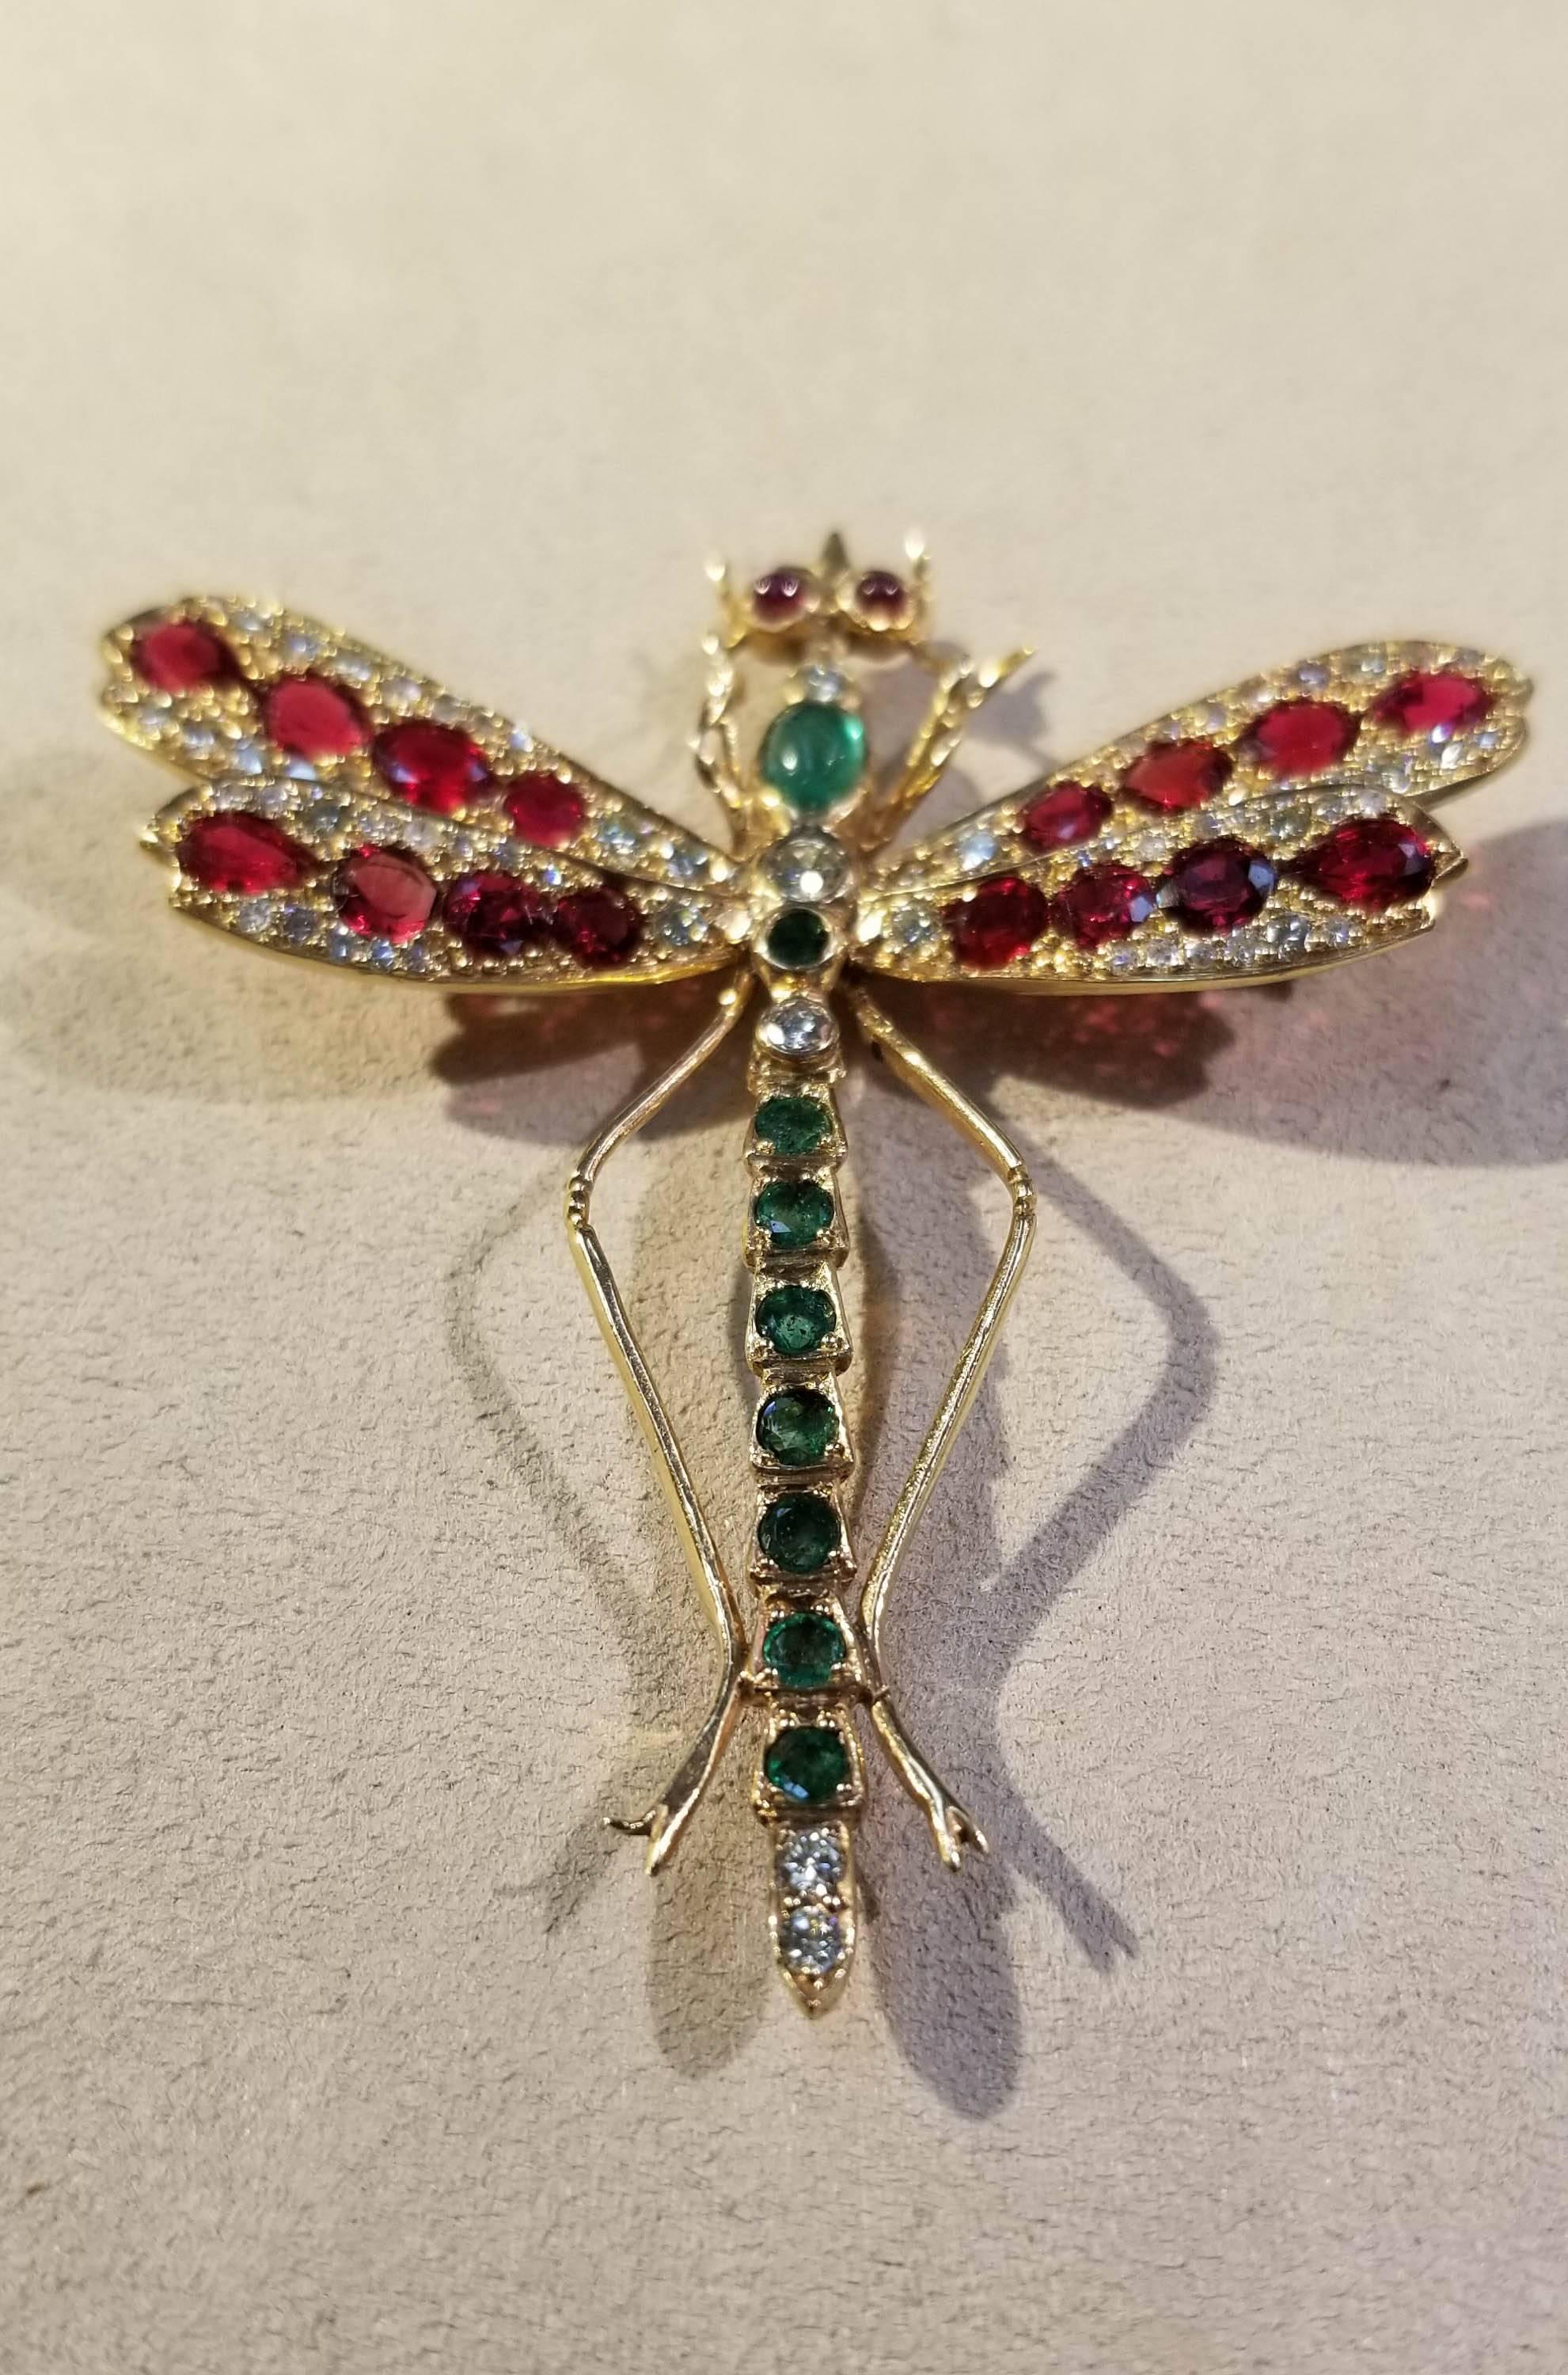 Dragonfly Pin, 14 Karat Yellow Gold In Excellent Condition For Sale In Santa Fe, NM